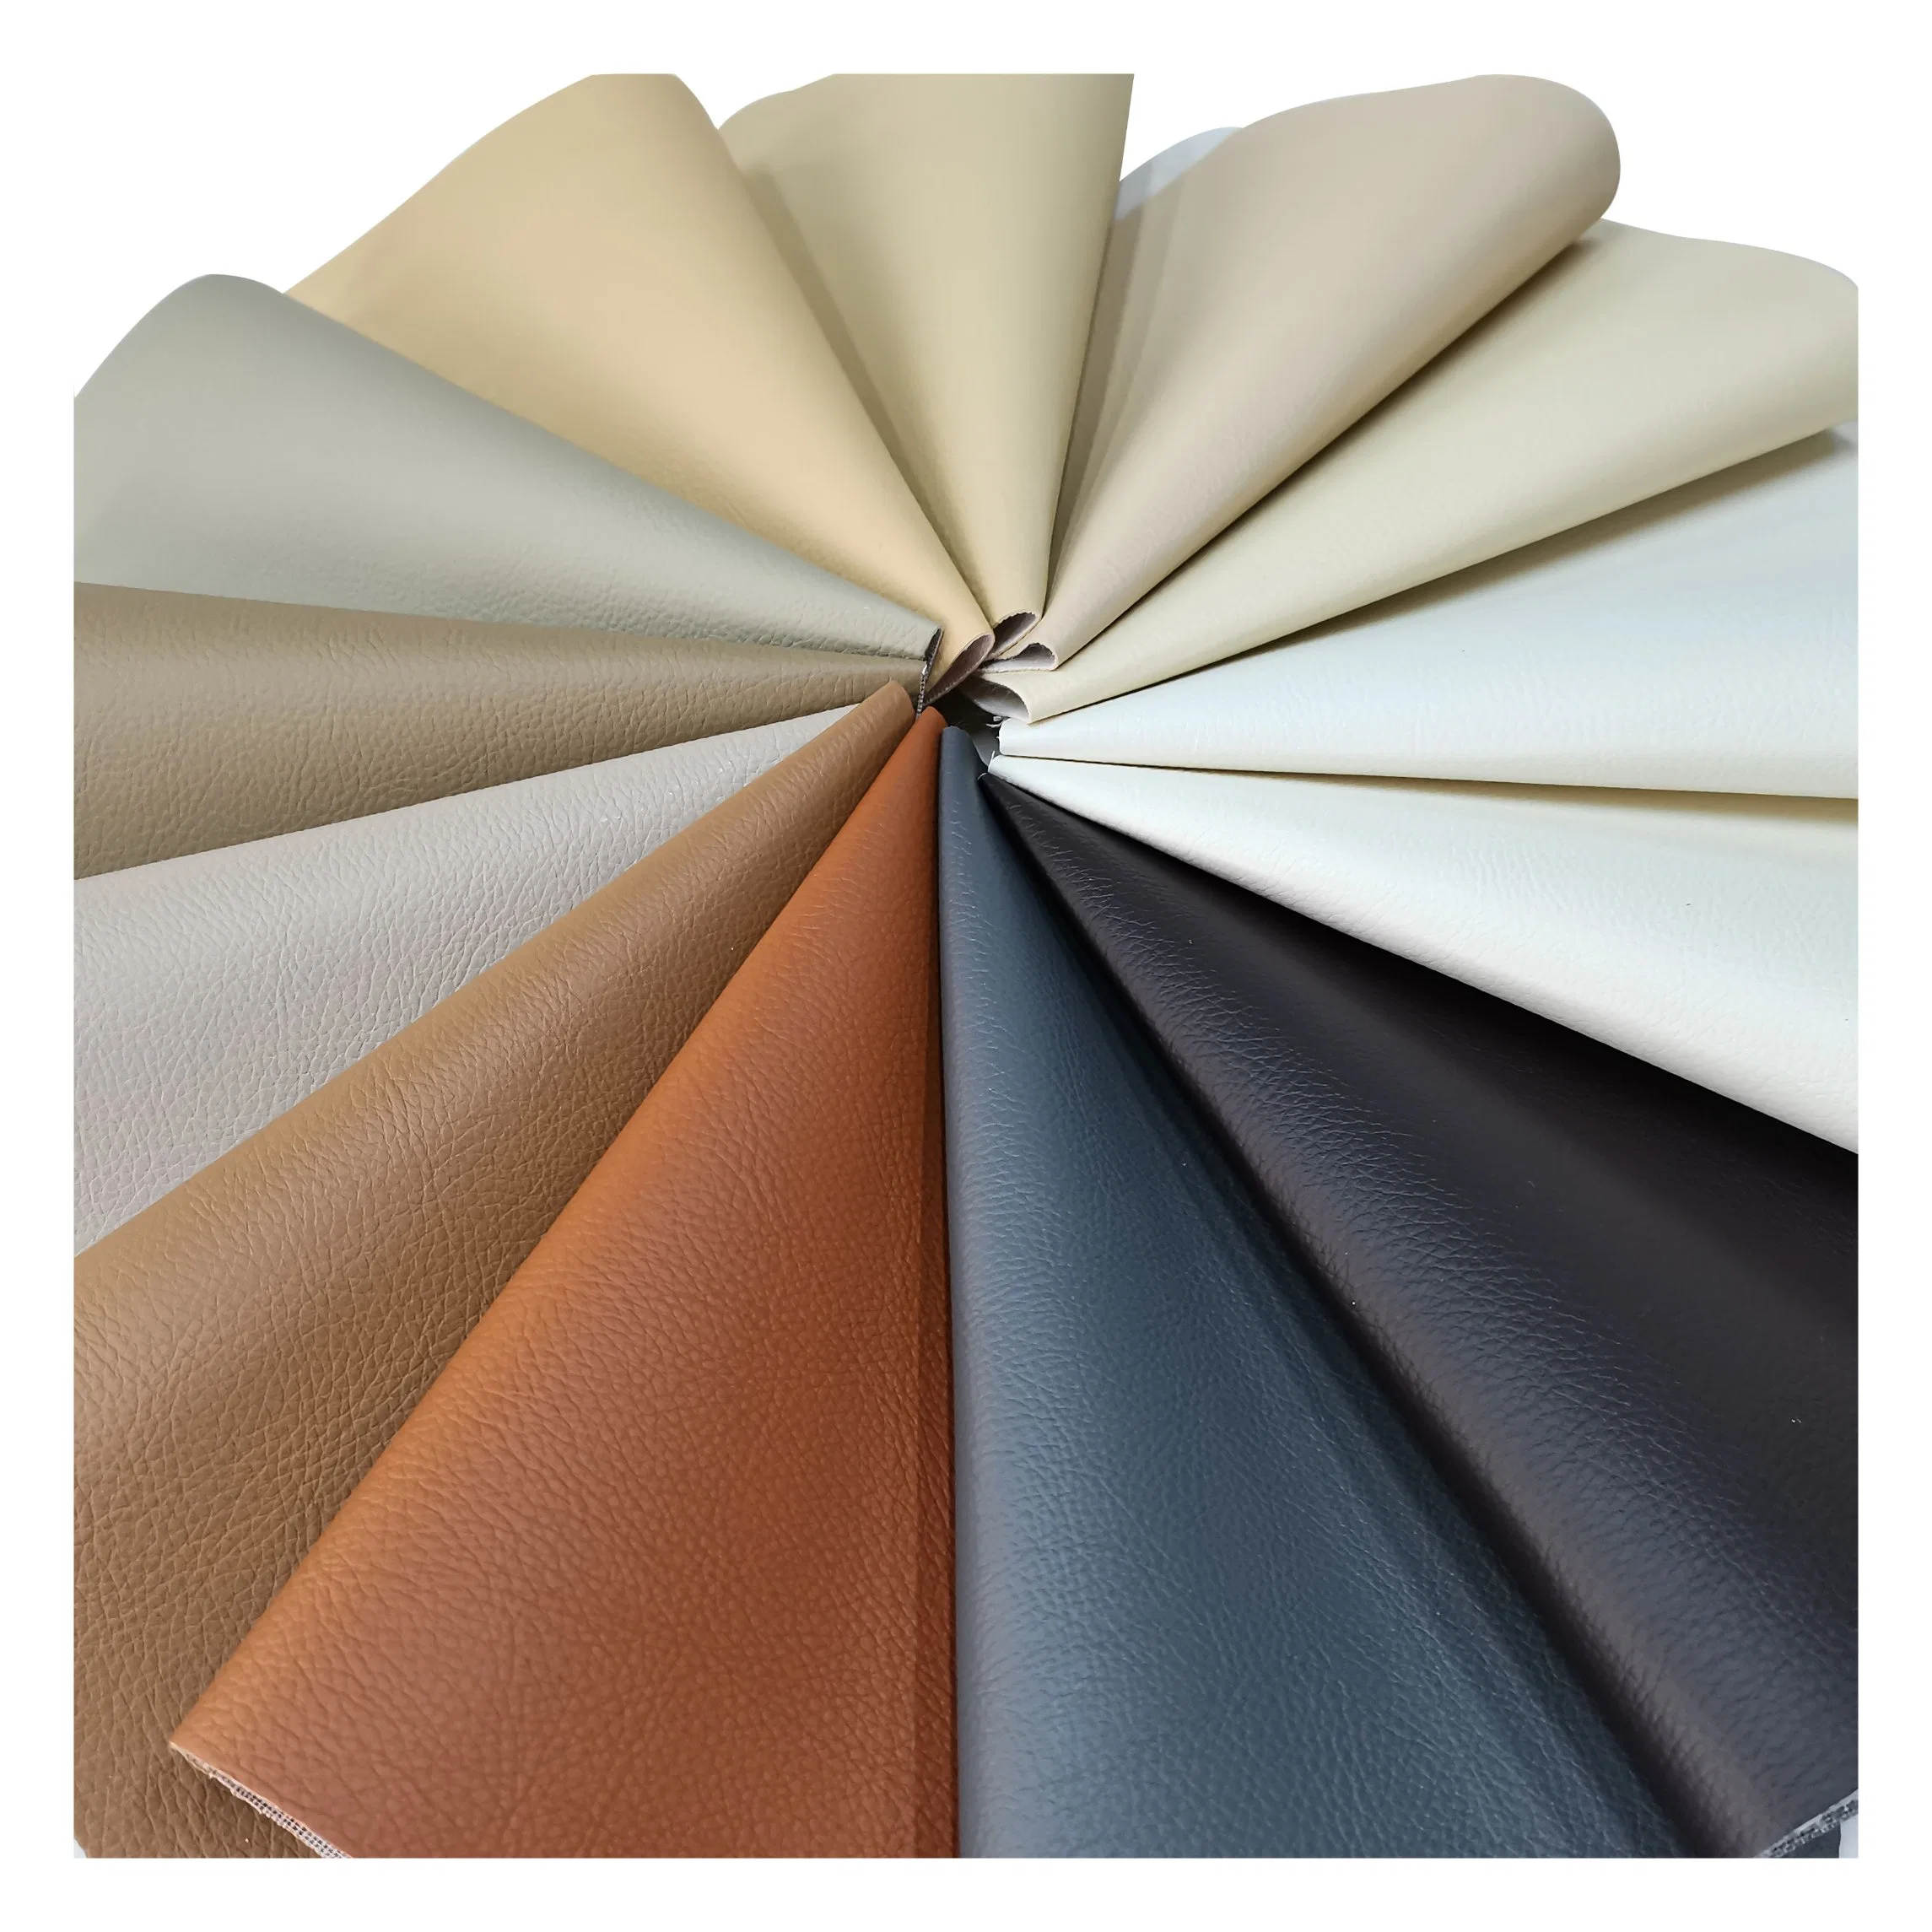 PVC New Design Artificial Leather Synthetic Leather for Luggage/Bags/Home Textile From China Manufacturer PVC